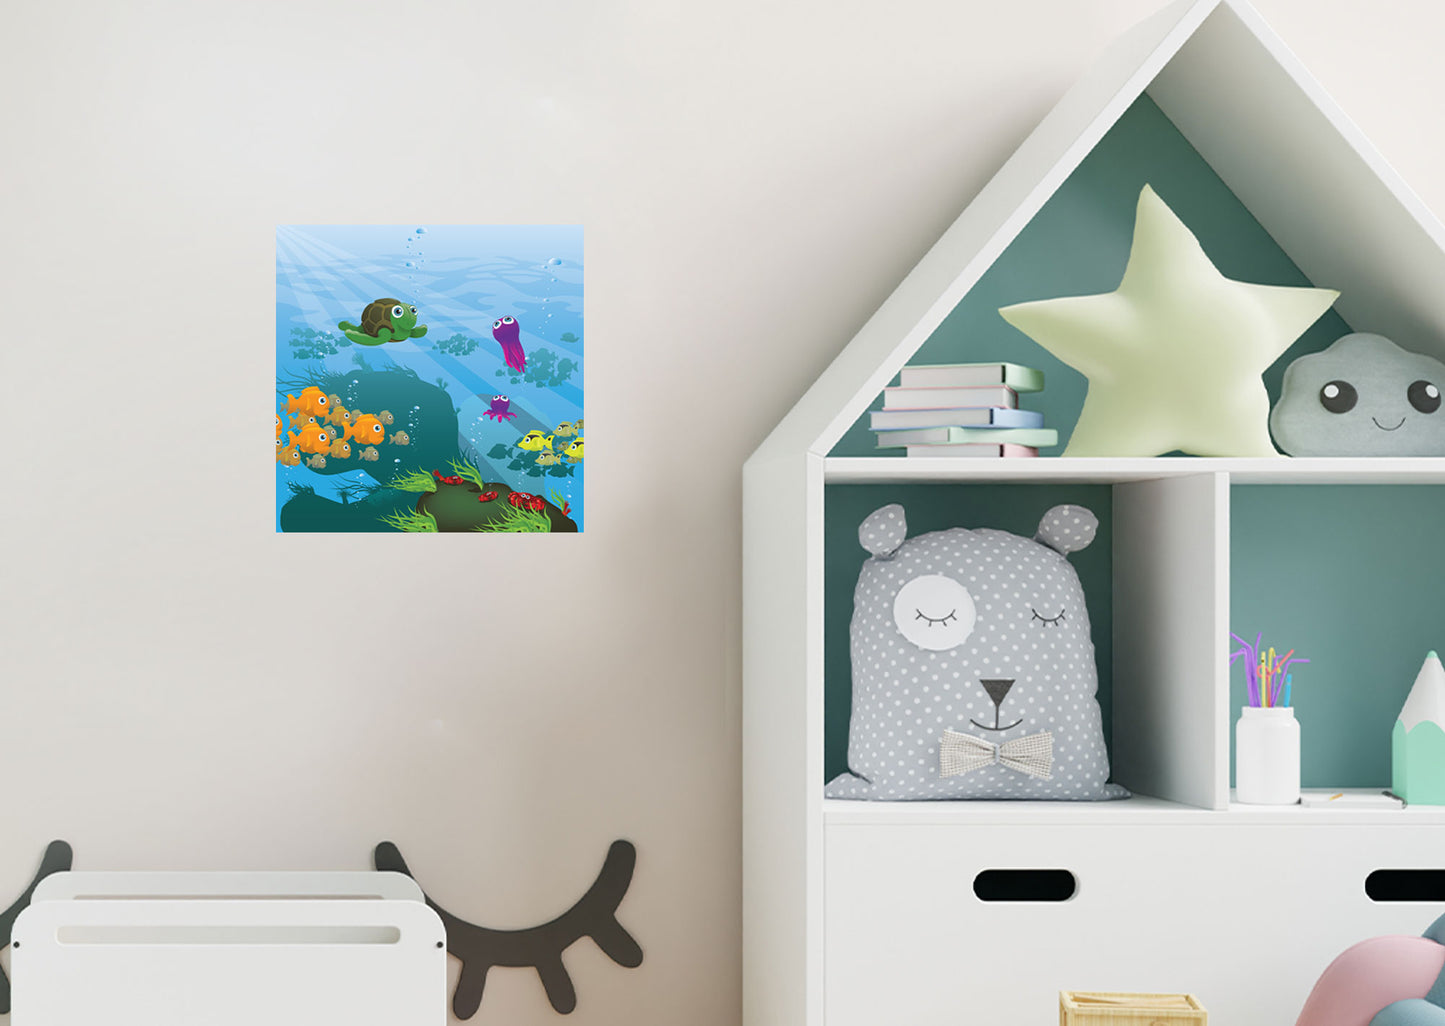 Nursery:  Turtle        -   Removable Wall   Adhesive Decal